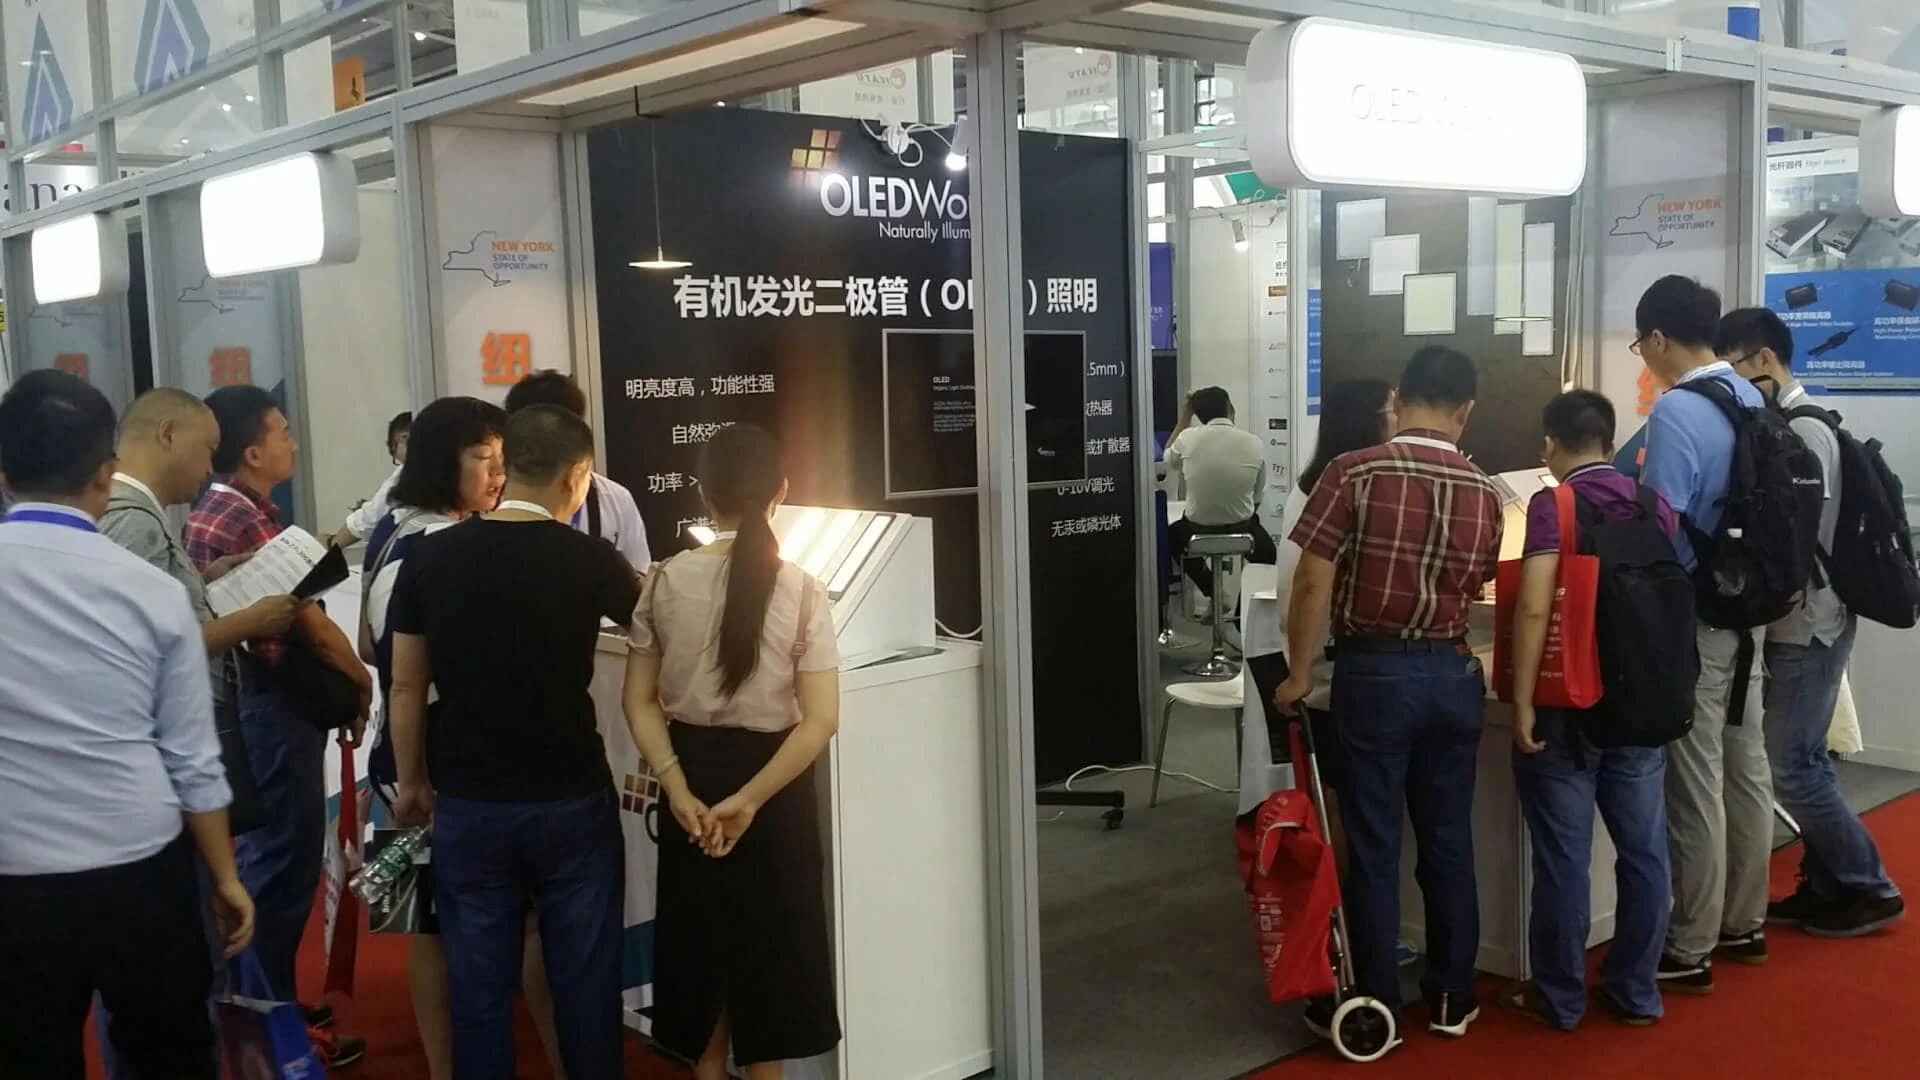 crowded OLEDWorks booth at CIOE in Shenzhen